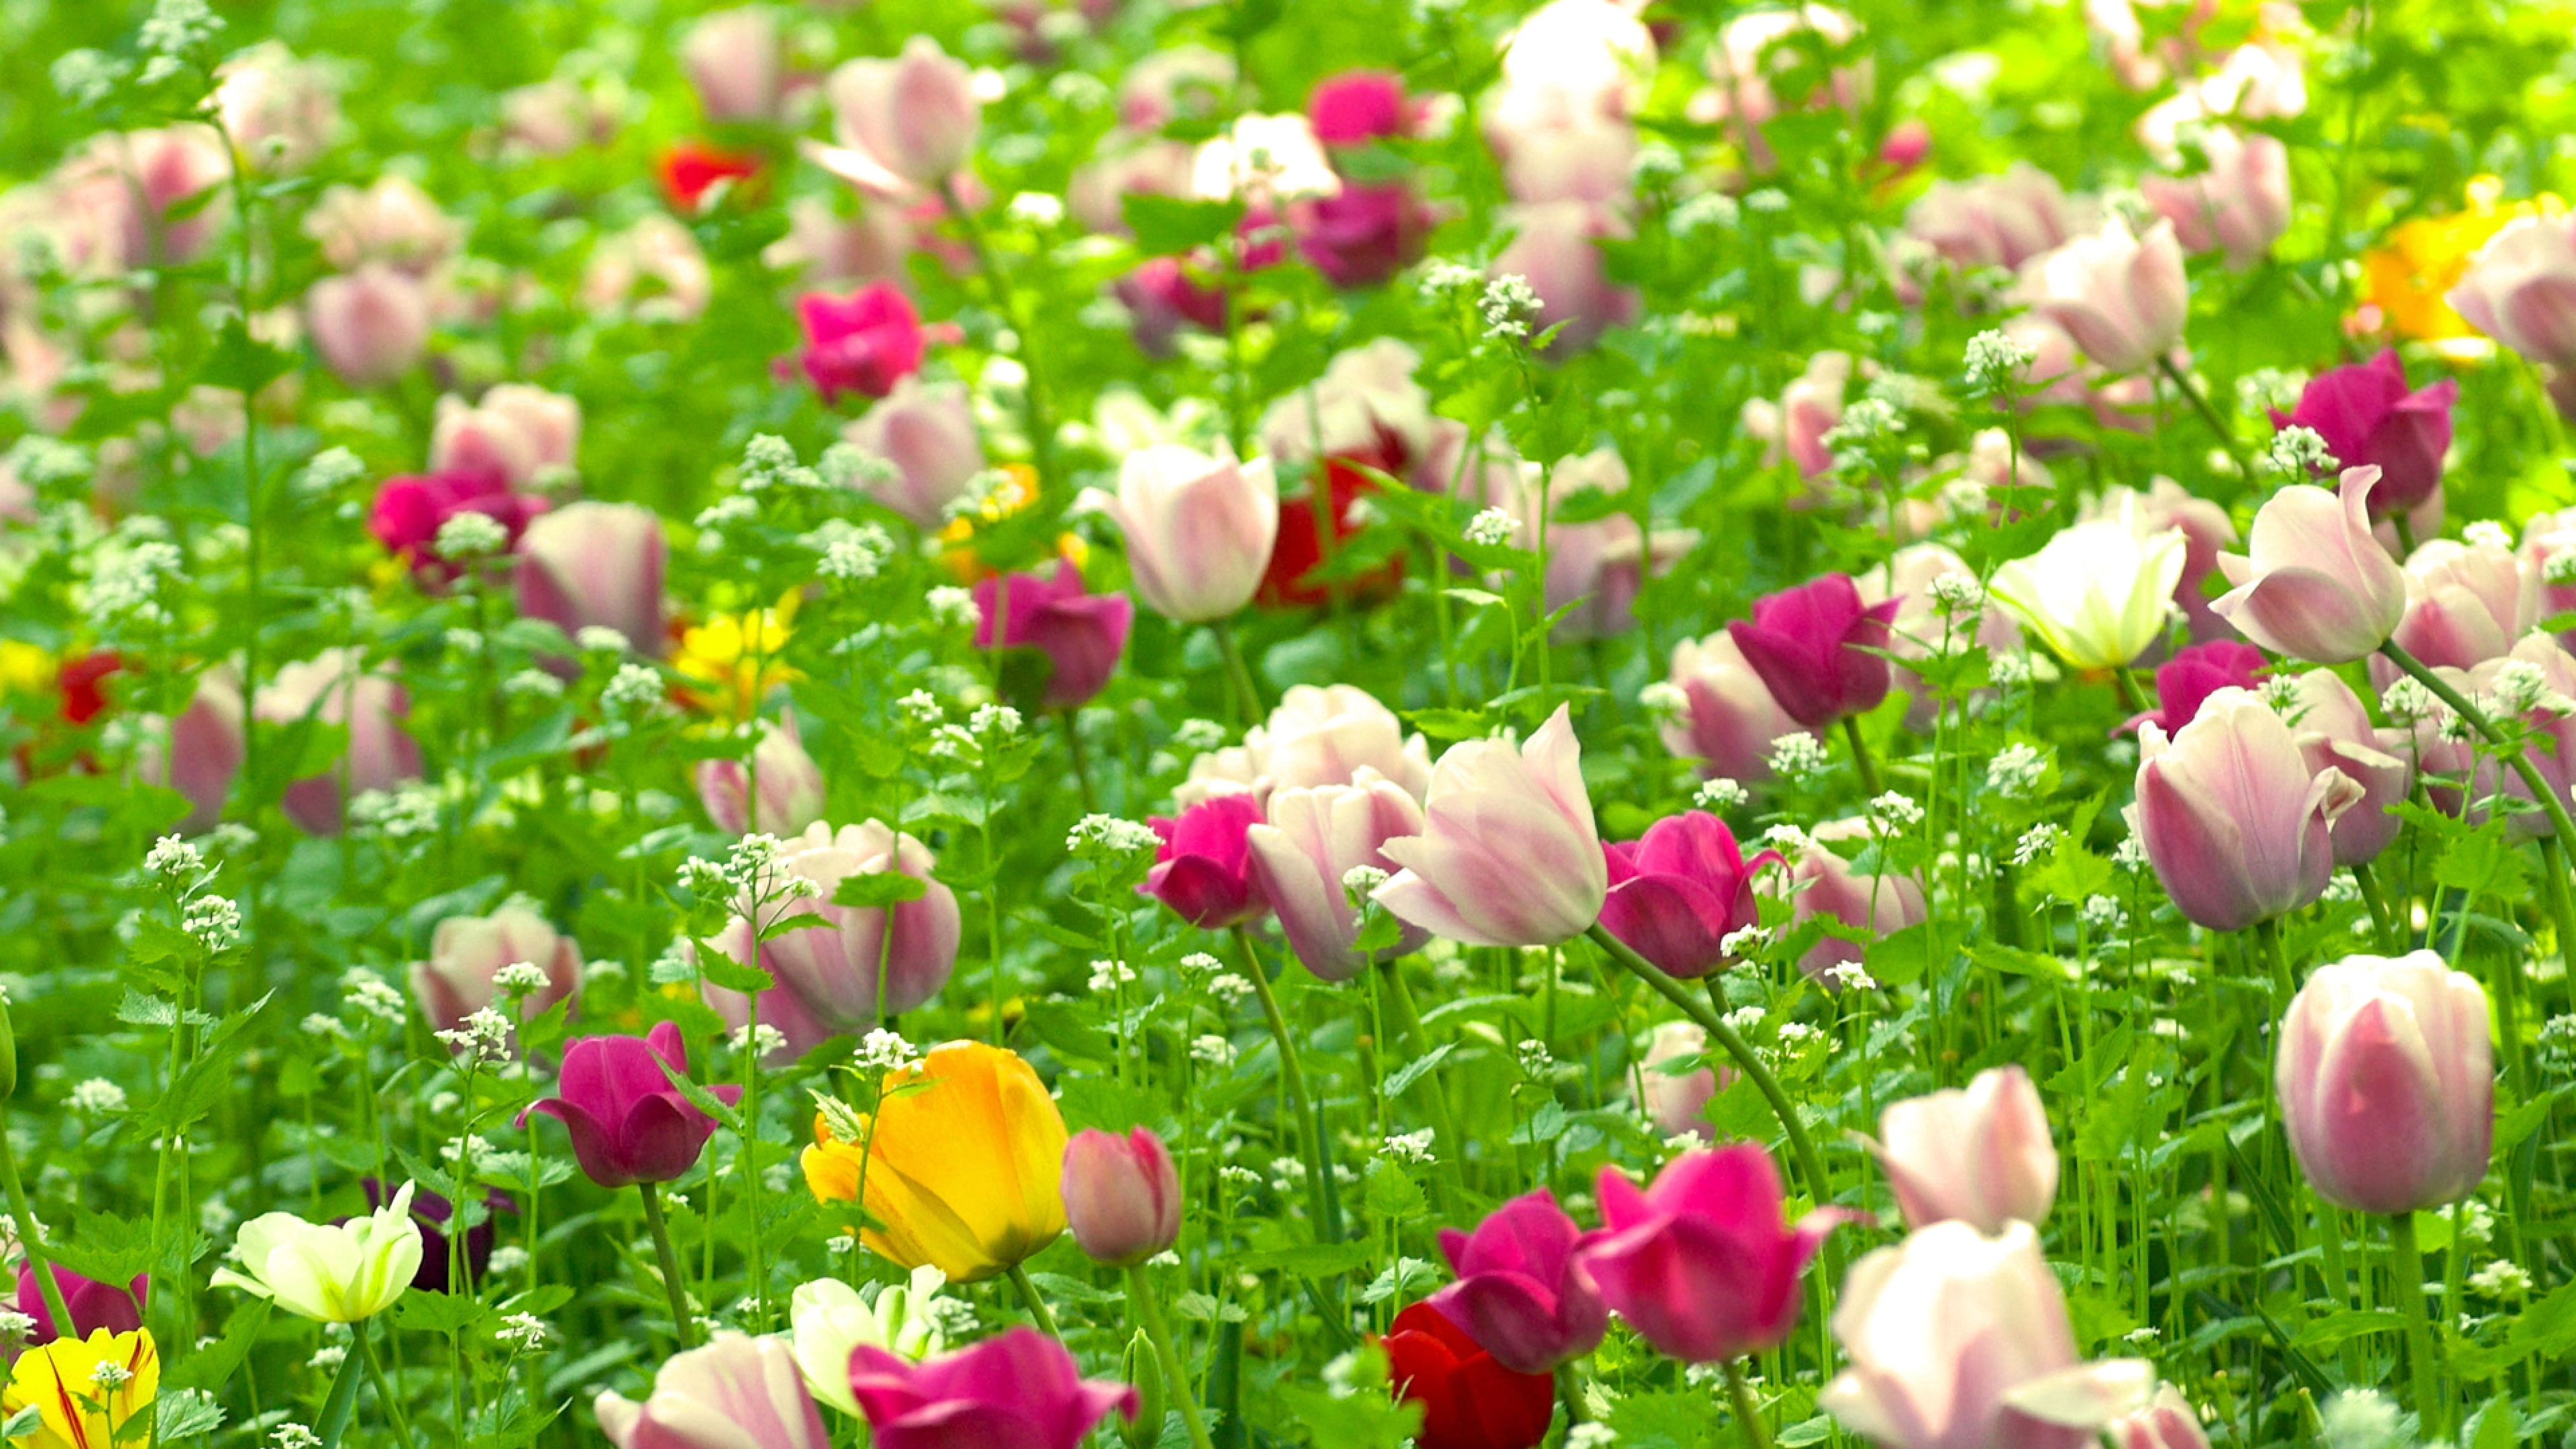 Tulips Flowers With Red White Yellow And Pink Field Green Grass Nature Spring Wallpaper Hd 3840×2160